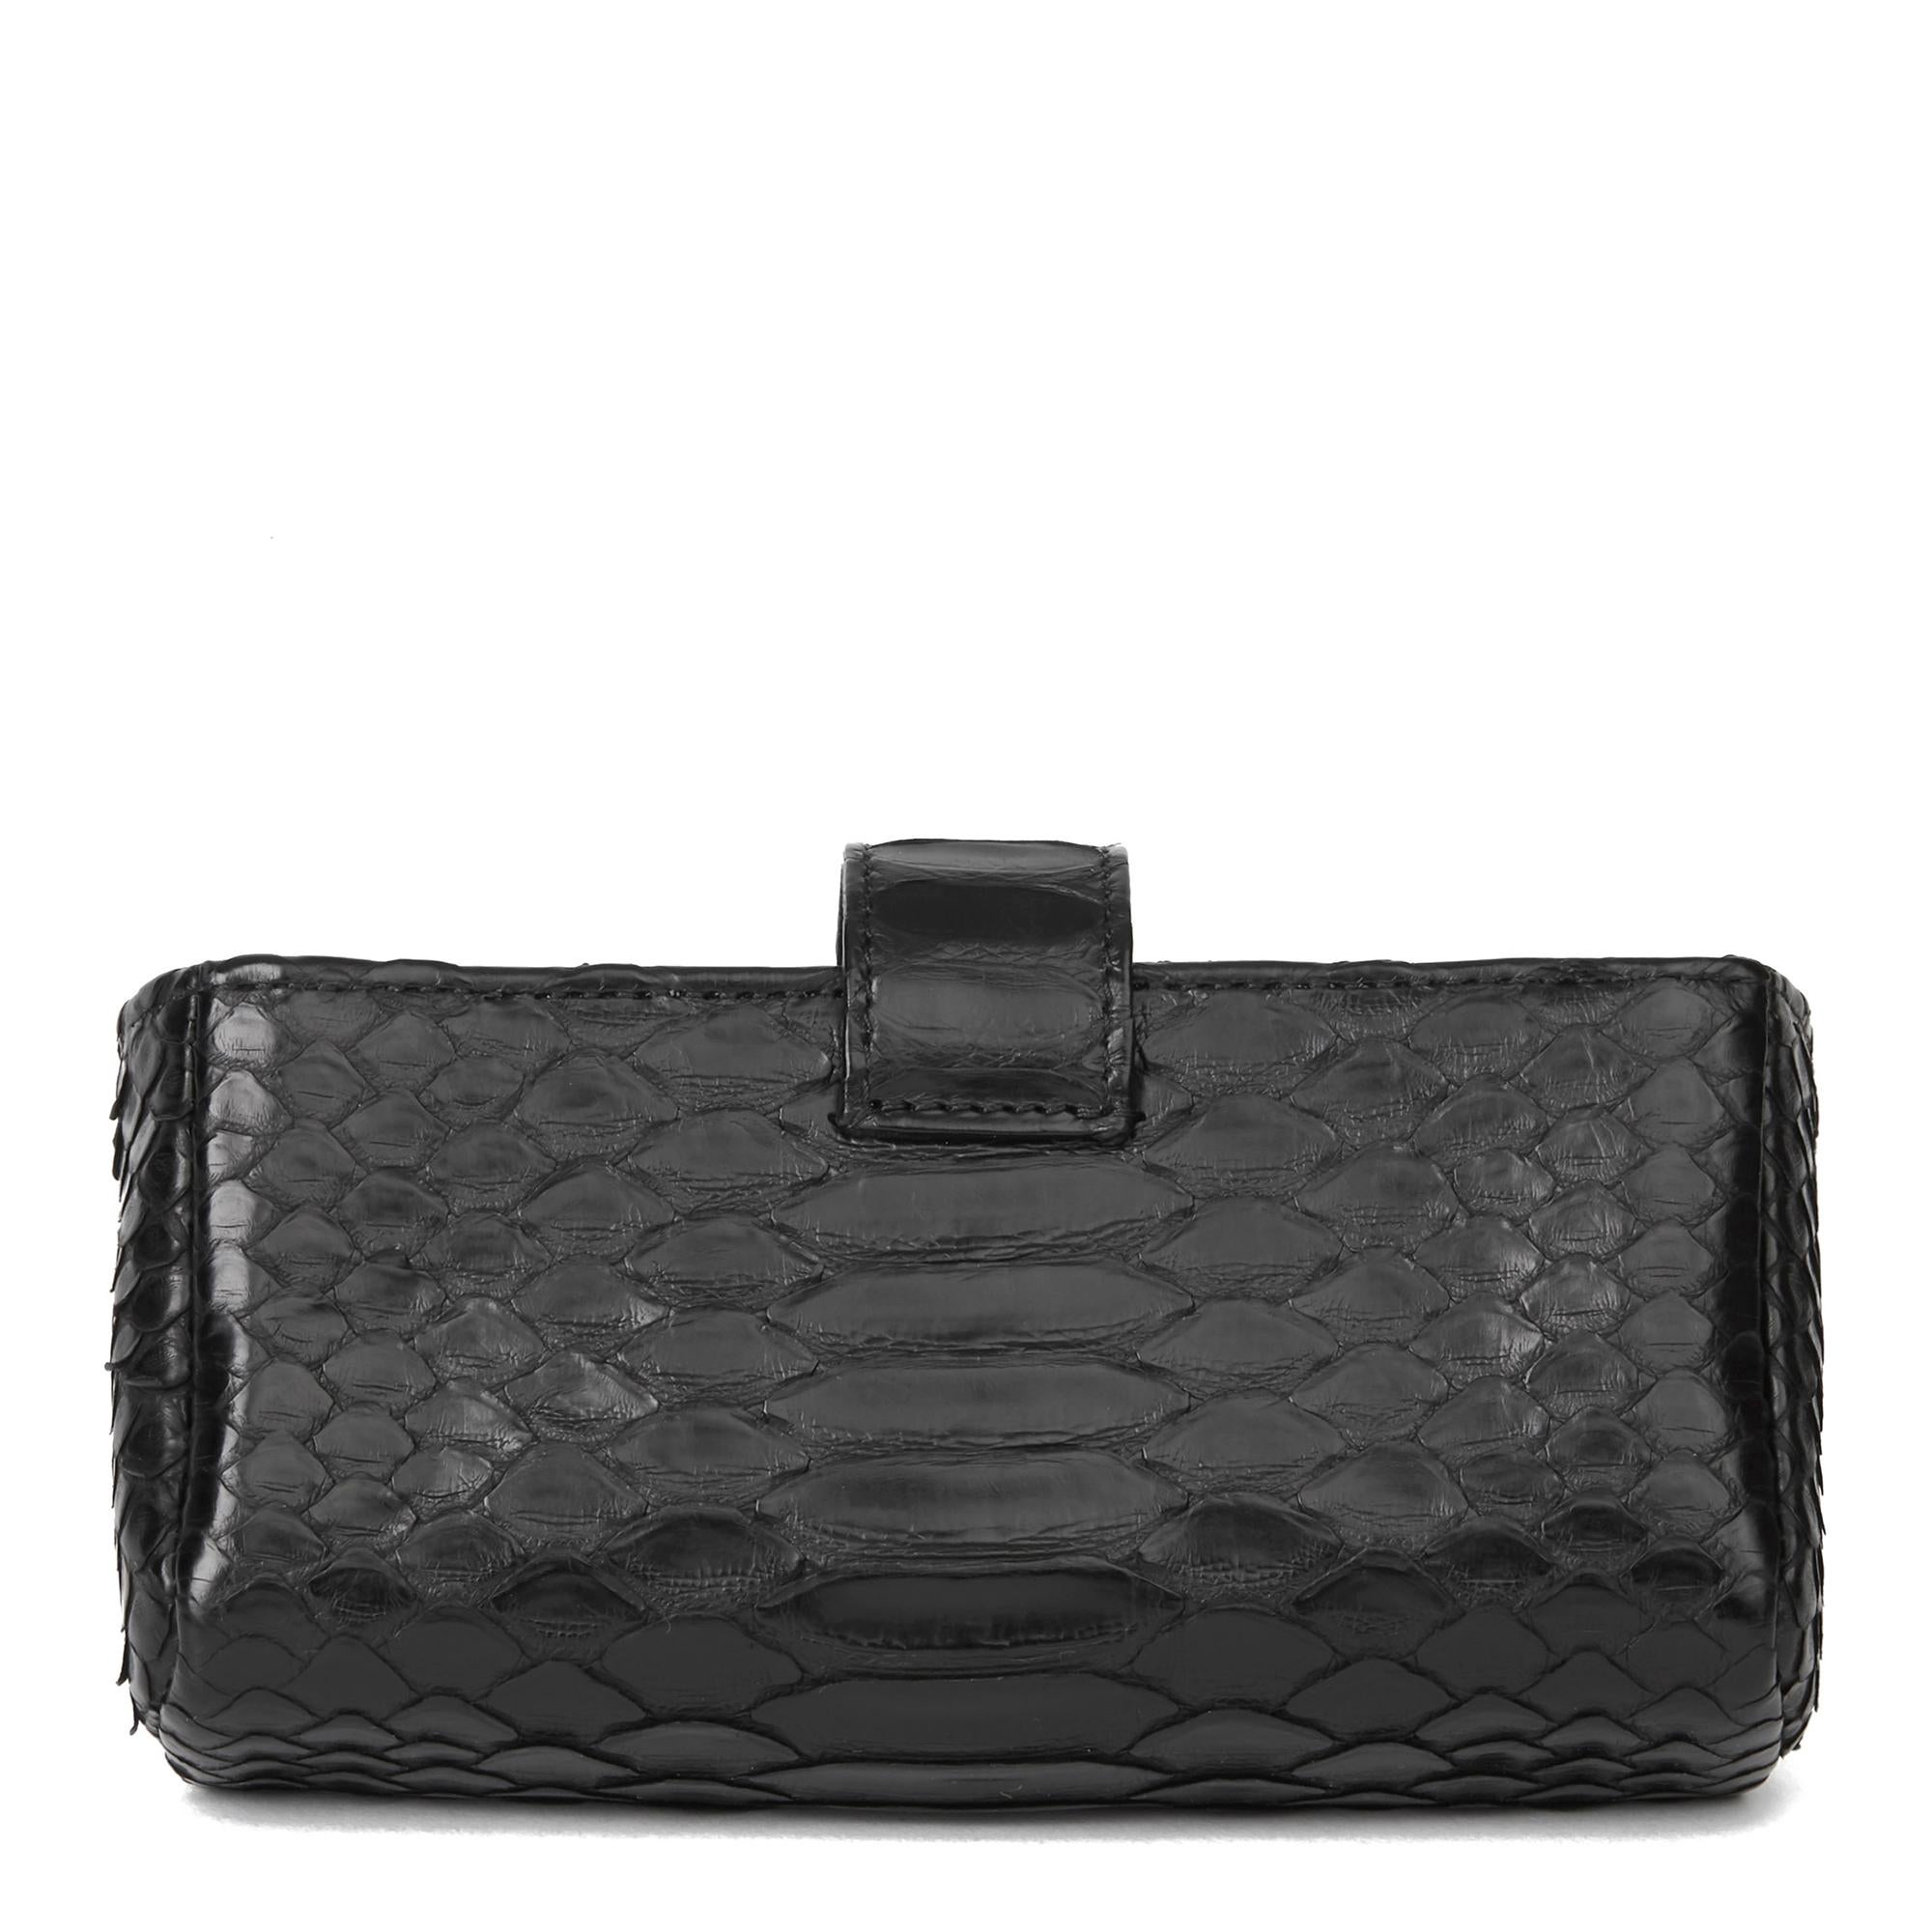 Women's 2015 Chanel Black Python Leather Pouch-on-Chain POC